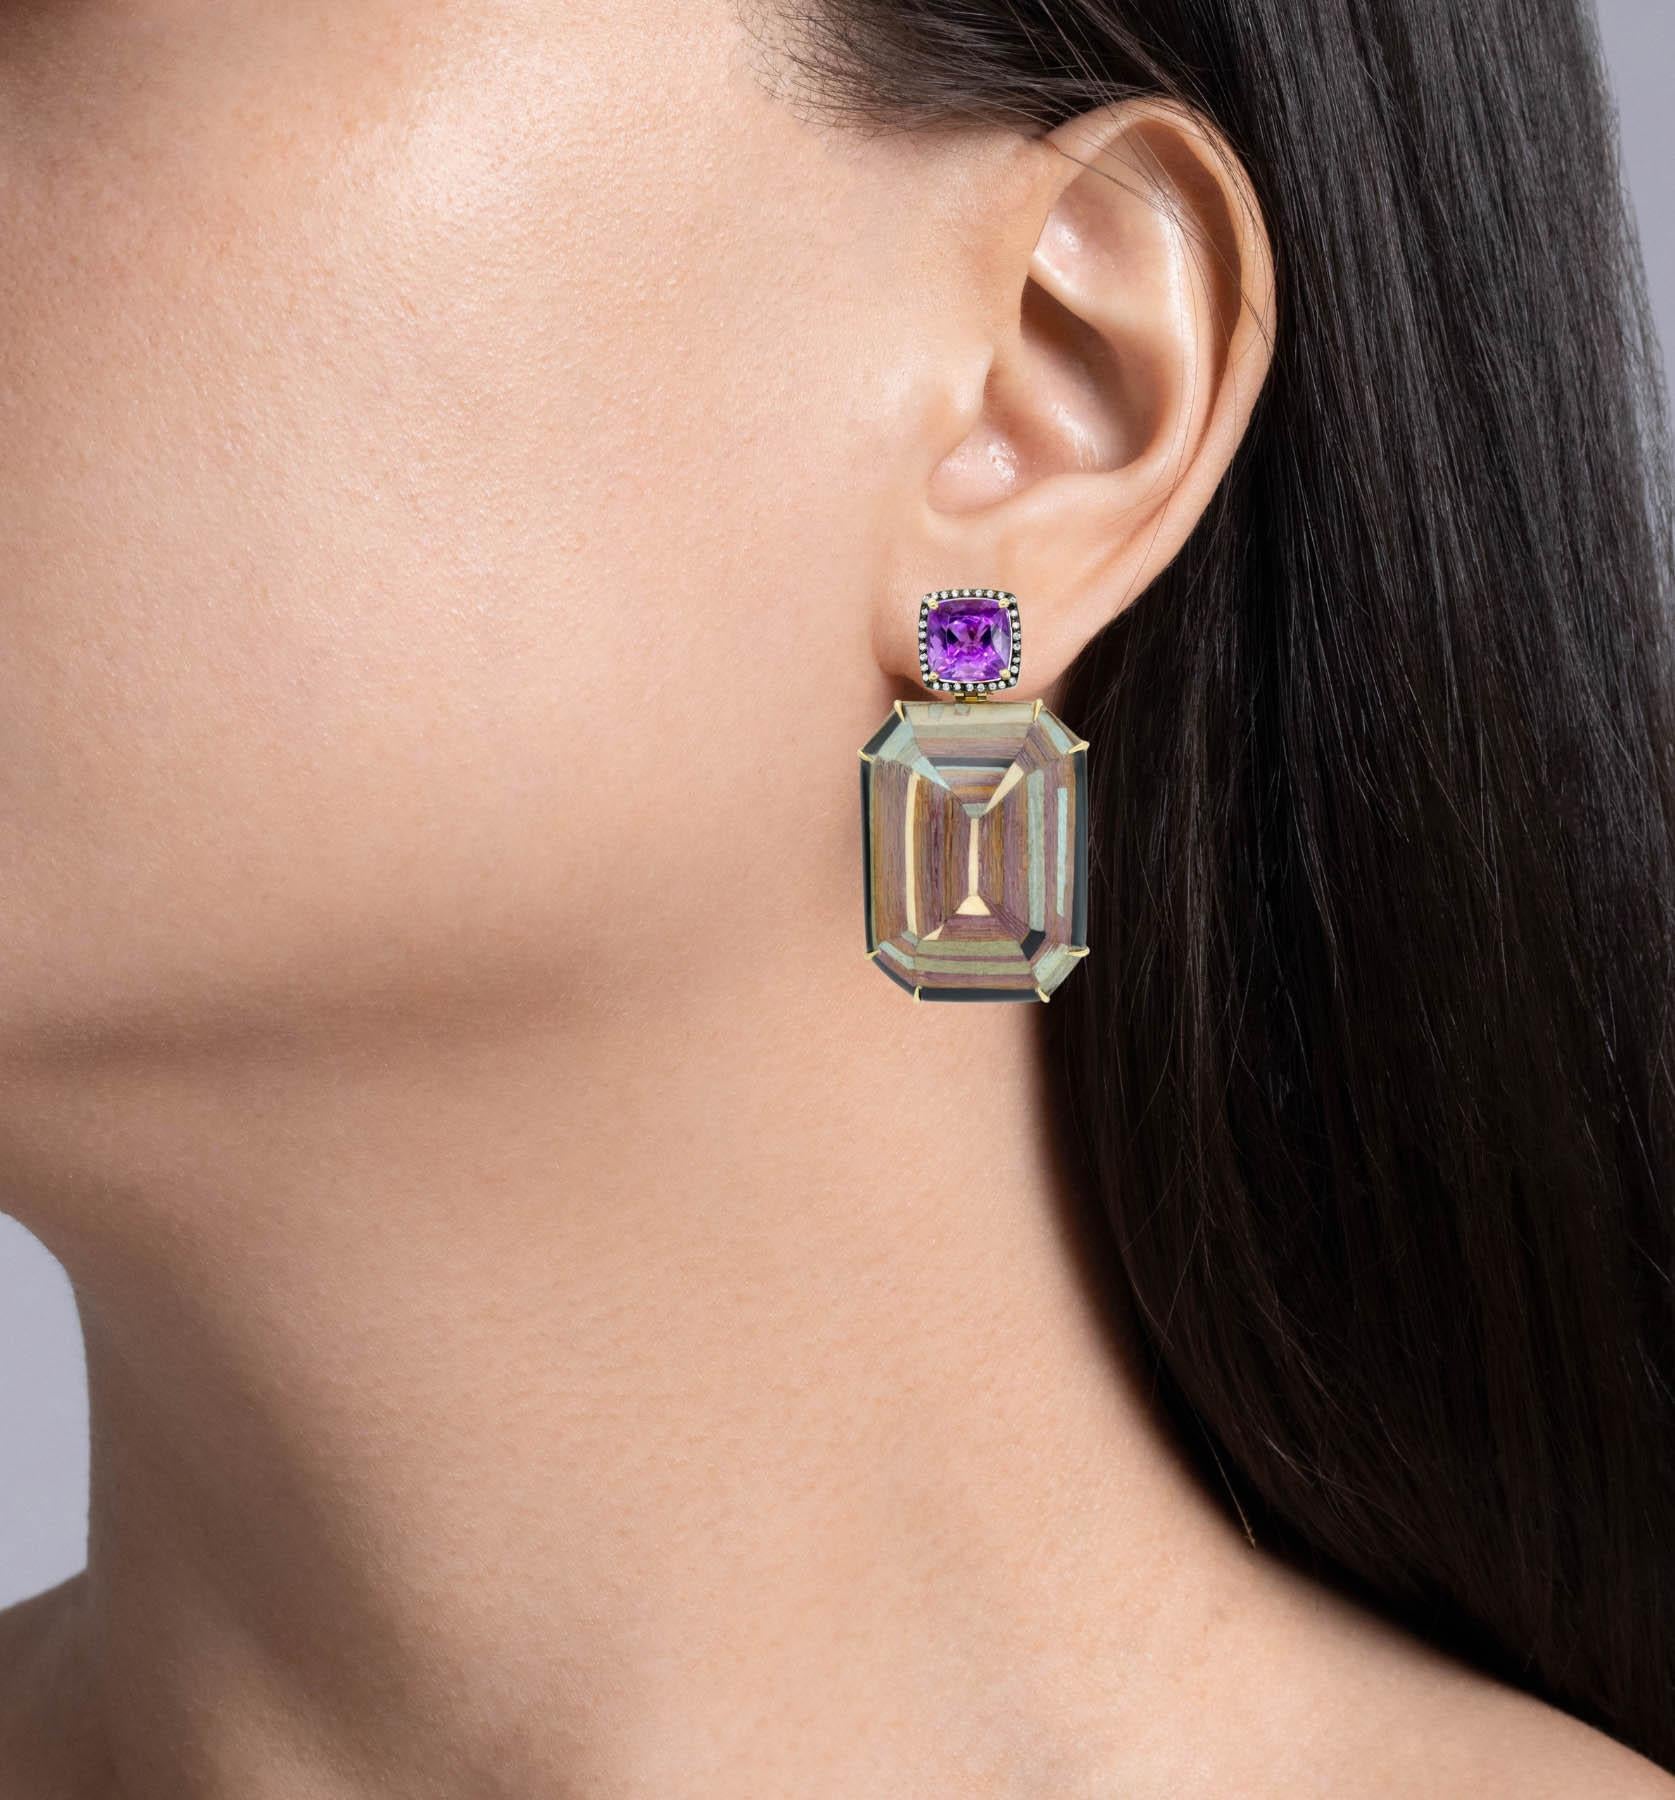 Silvia Furmanovich 18k Yellow Gold Amethyst and Diamond Marquetry Wood Rectangular Drop Earrings 
Set with 2 Cushion shaped Amethyst; estimated total weight is 14.43ctw.
The Amethysts are surrounded with 0.30ctw of diamonds.
Each earring is almost 2